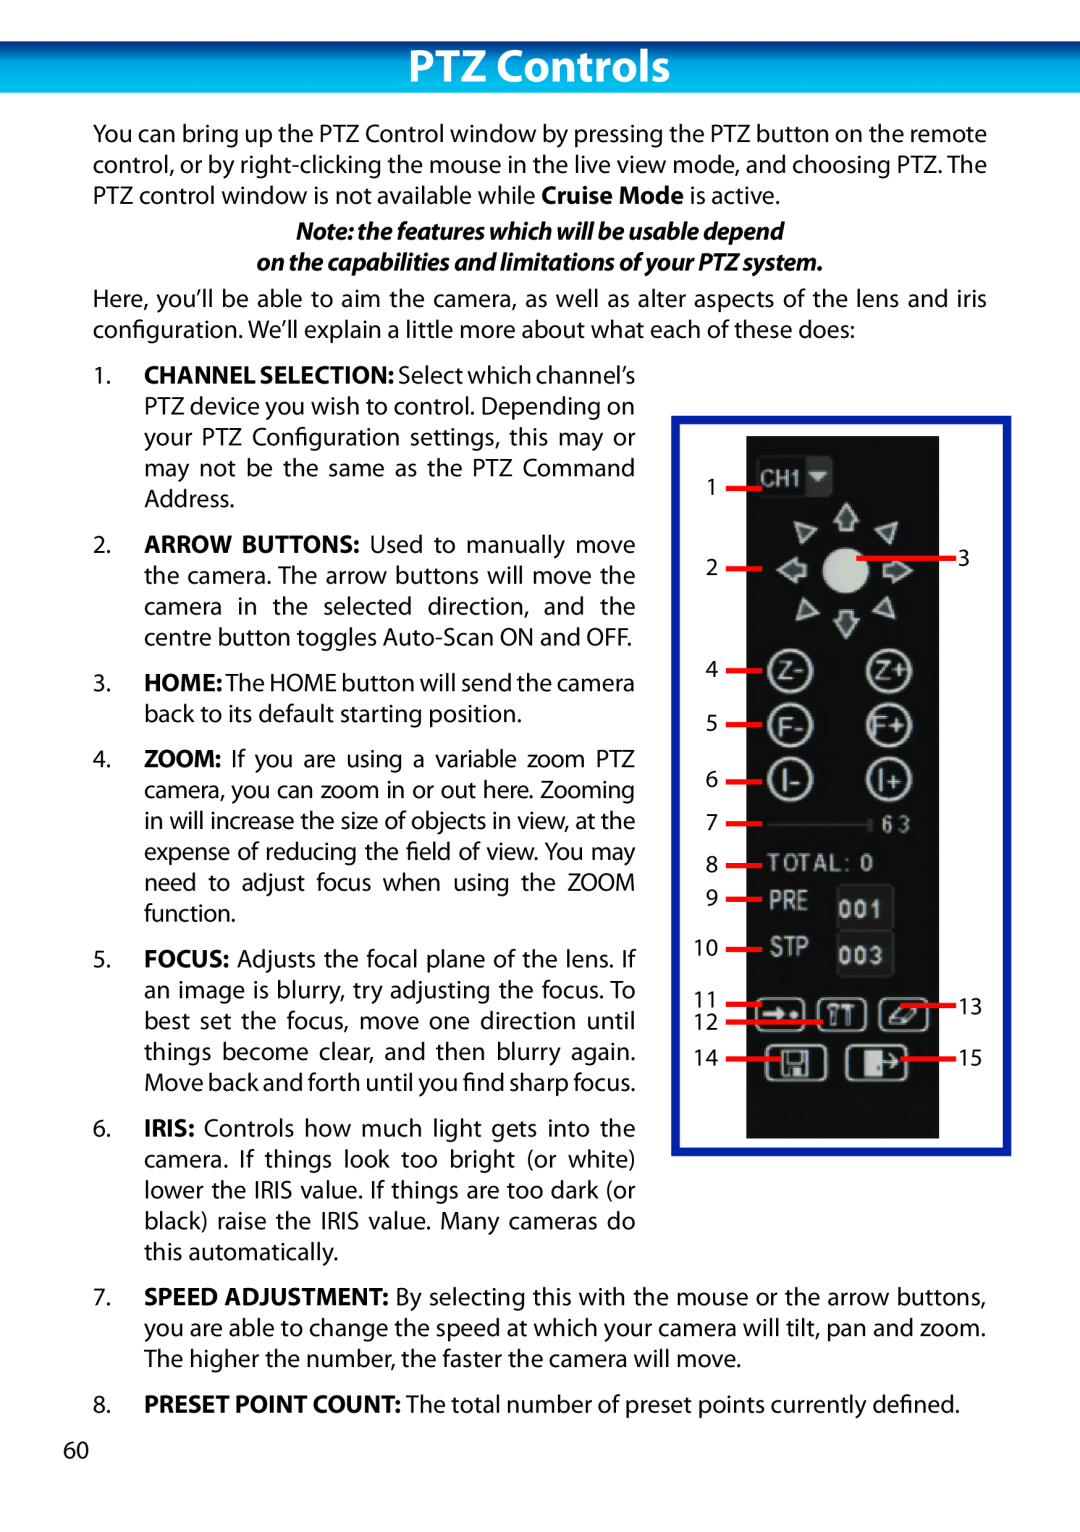 Swann H.264 manual PTZ Controls, Note: the features which will be usable depend 